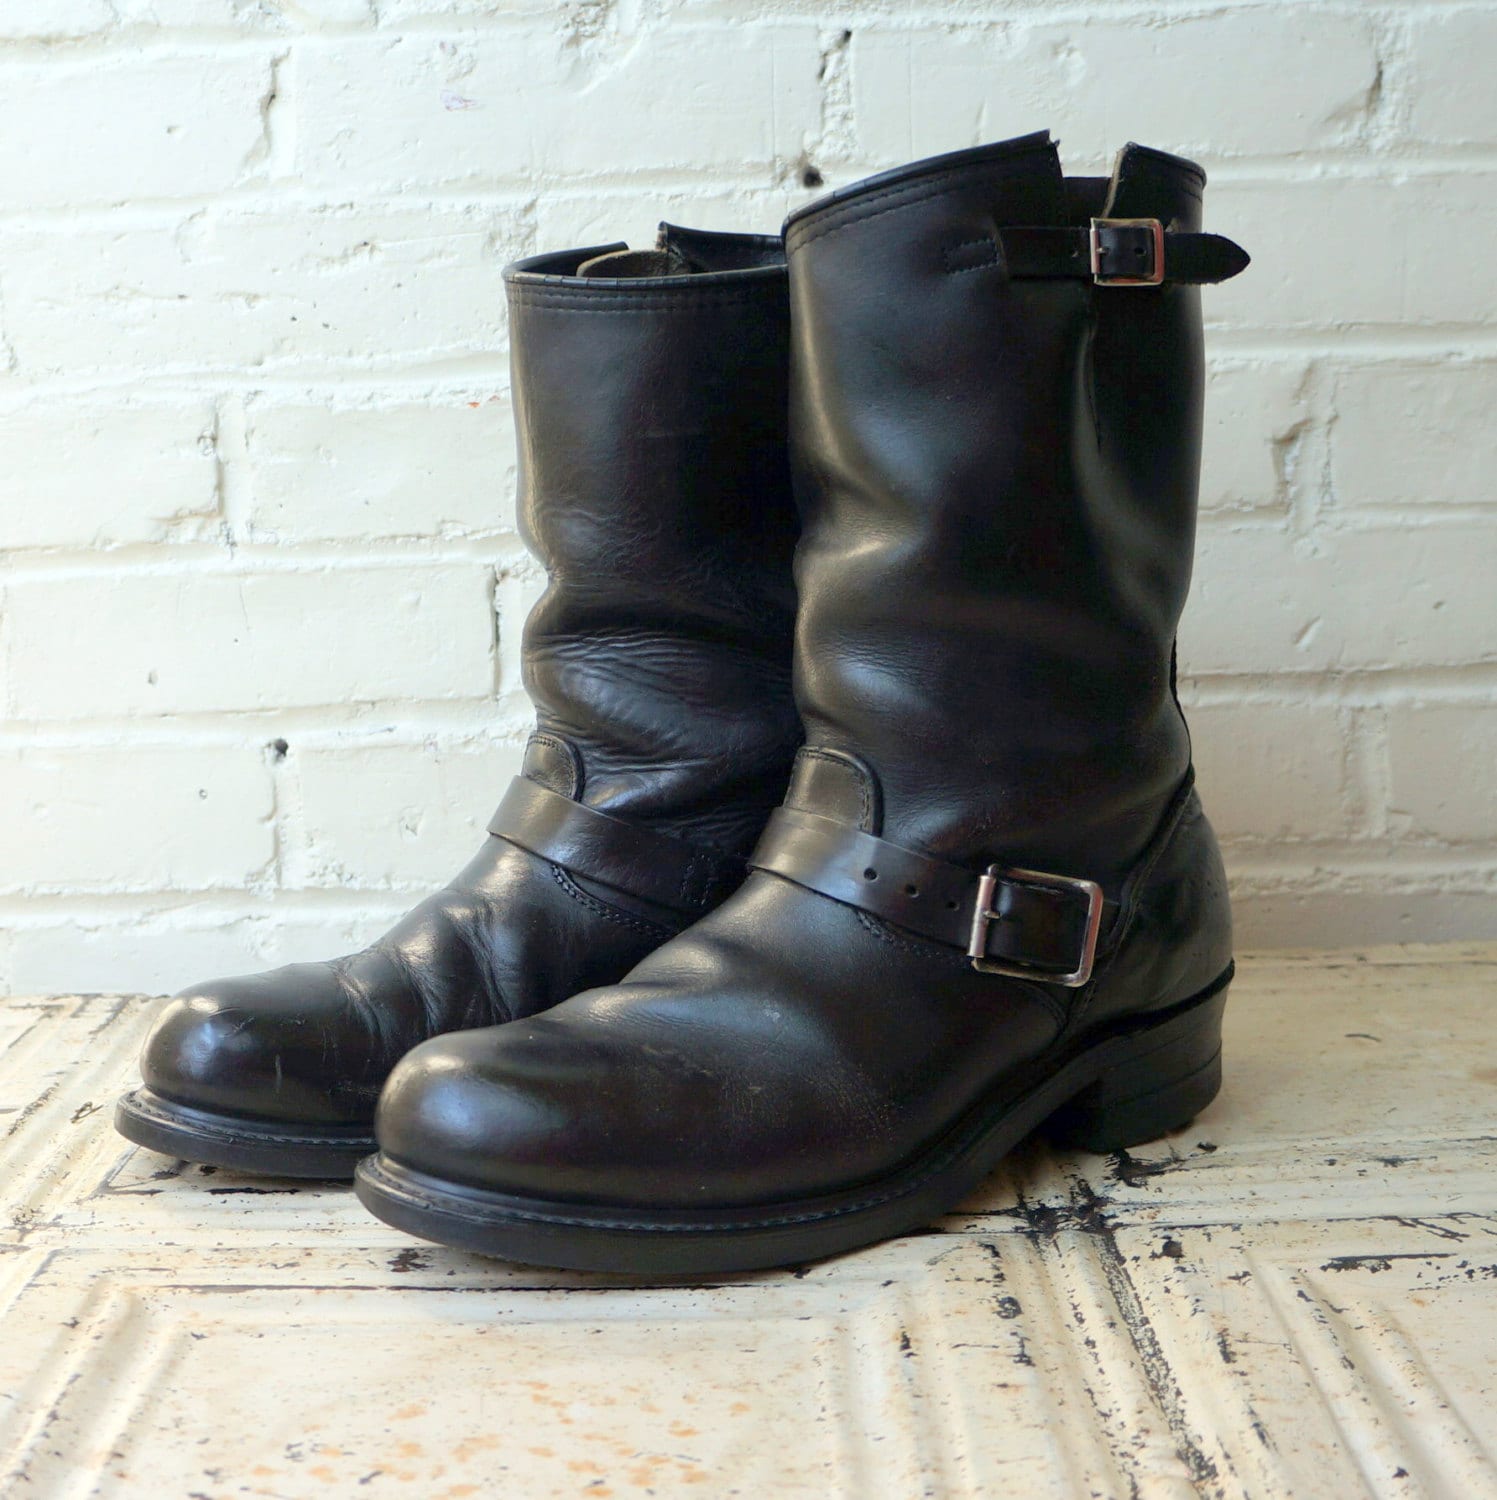 Outlaw Rider 1960s Vintage Engineer Boots Mens 8.5 EE Wide